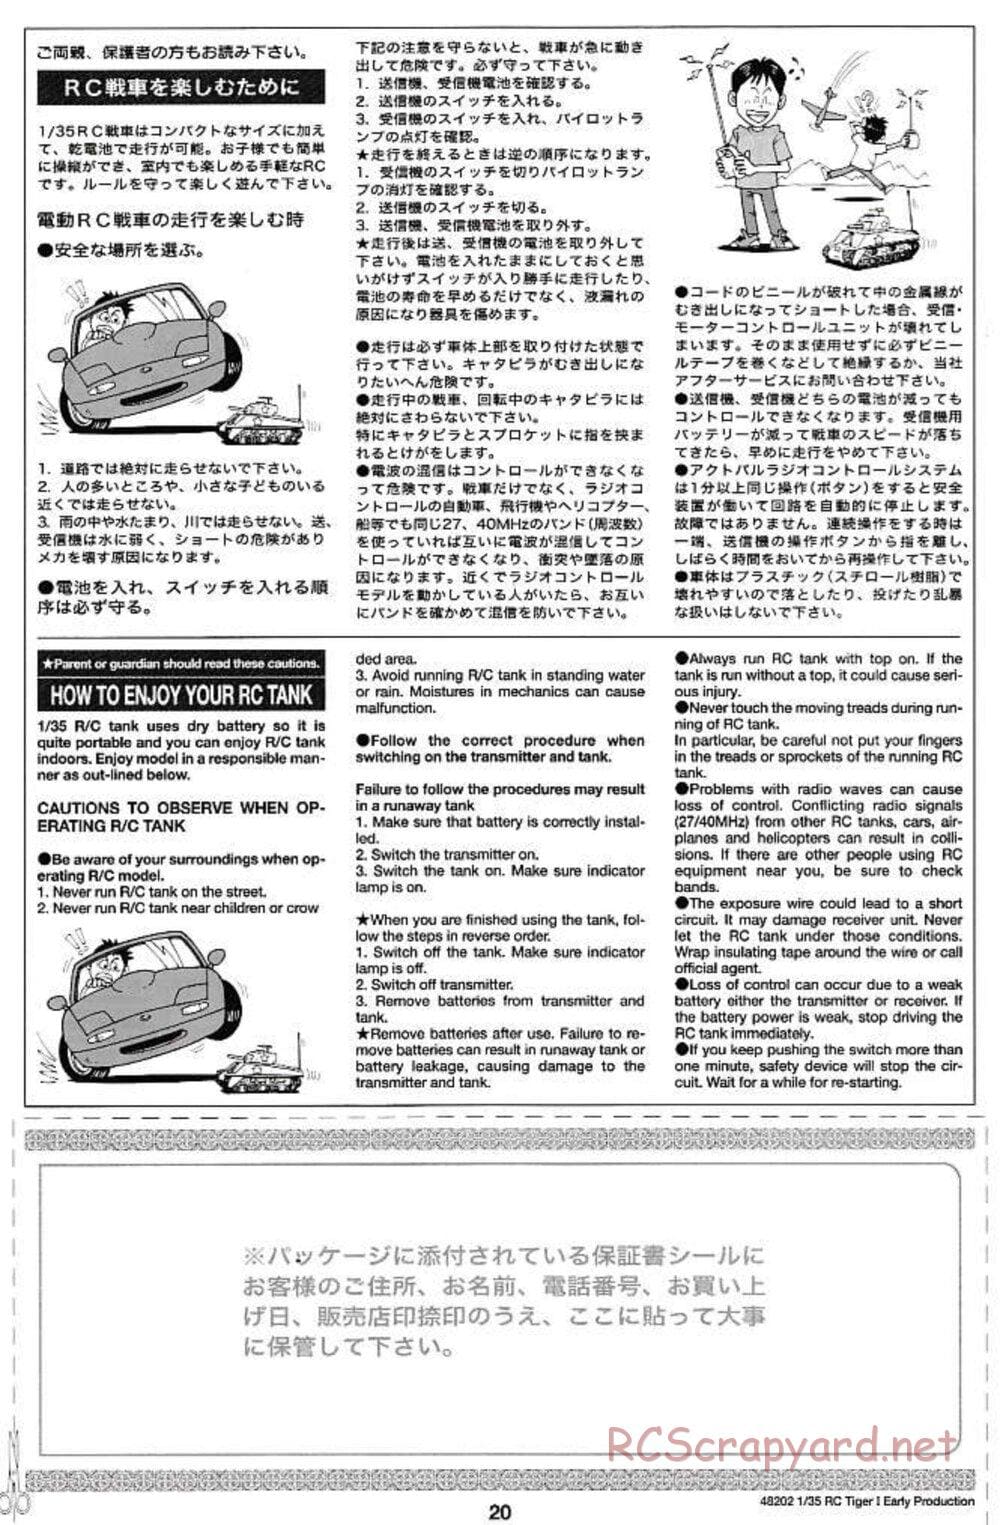 Tamiya - German Tiger 1 Early Production - 1/35 Scale Chassis - Manual - Page 20